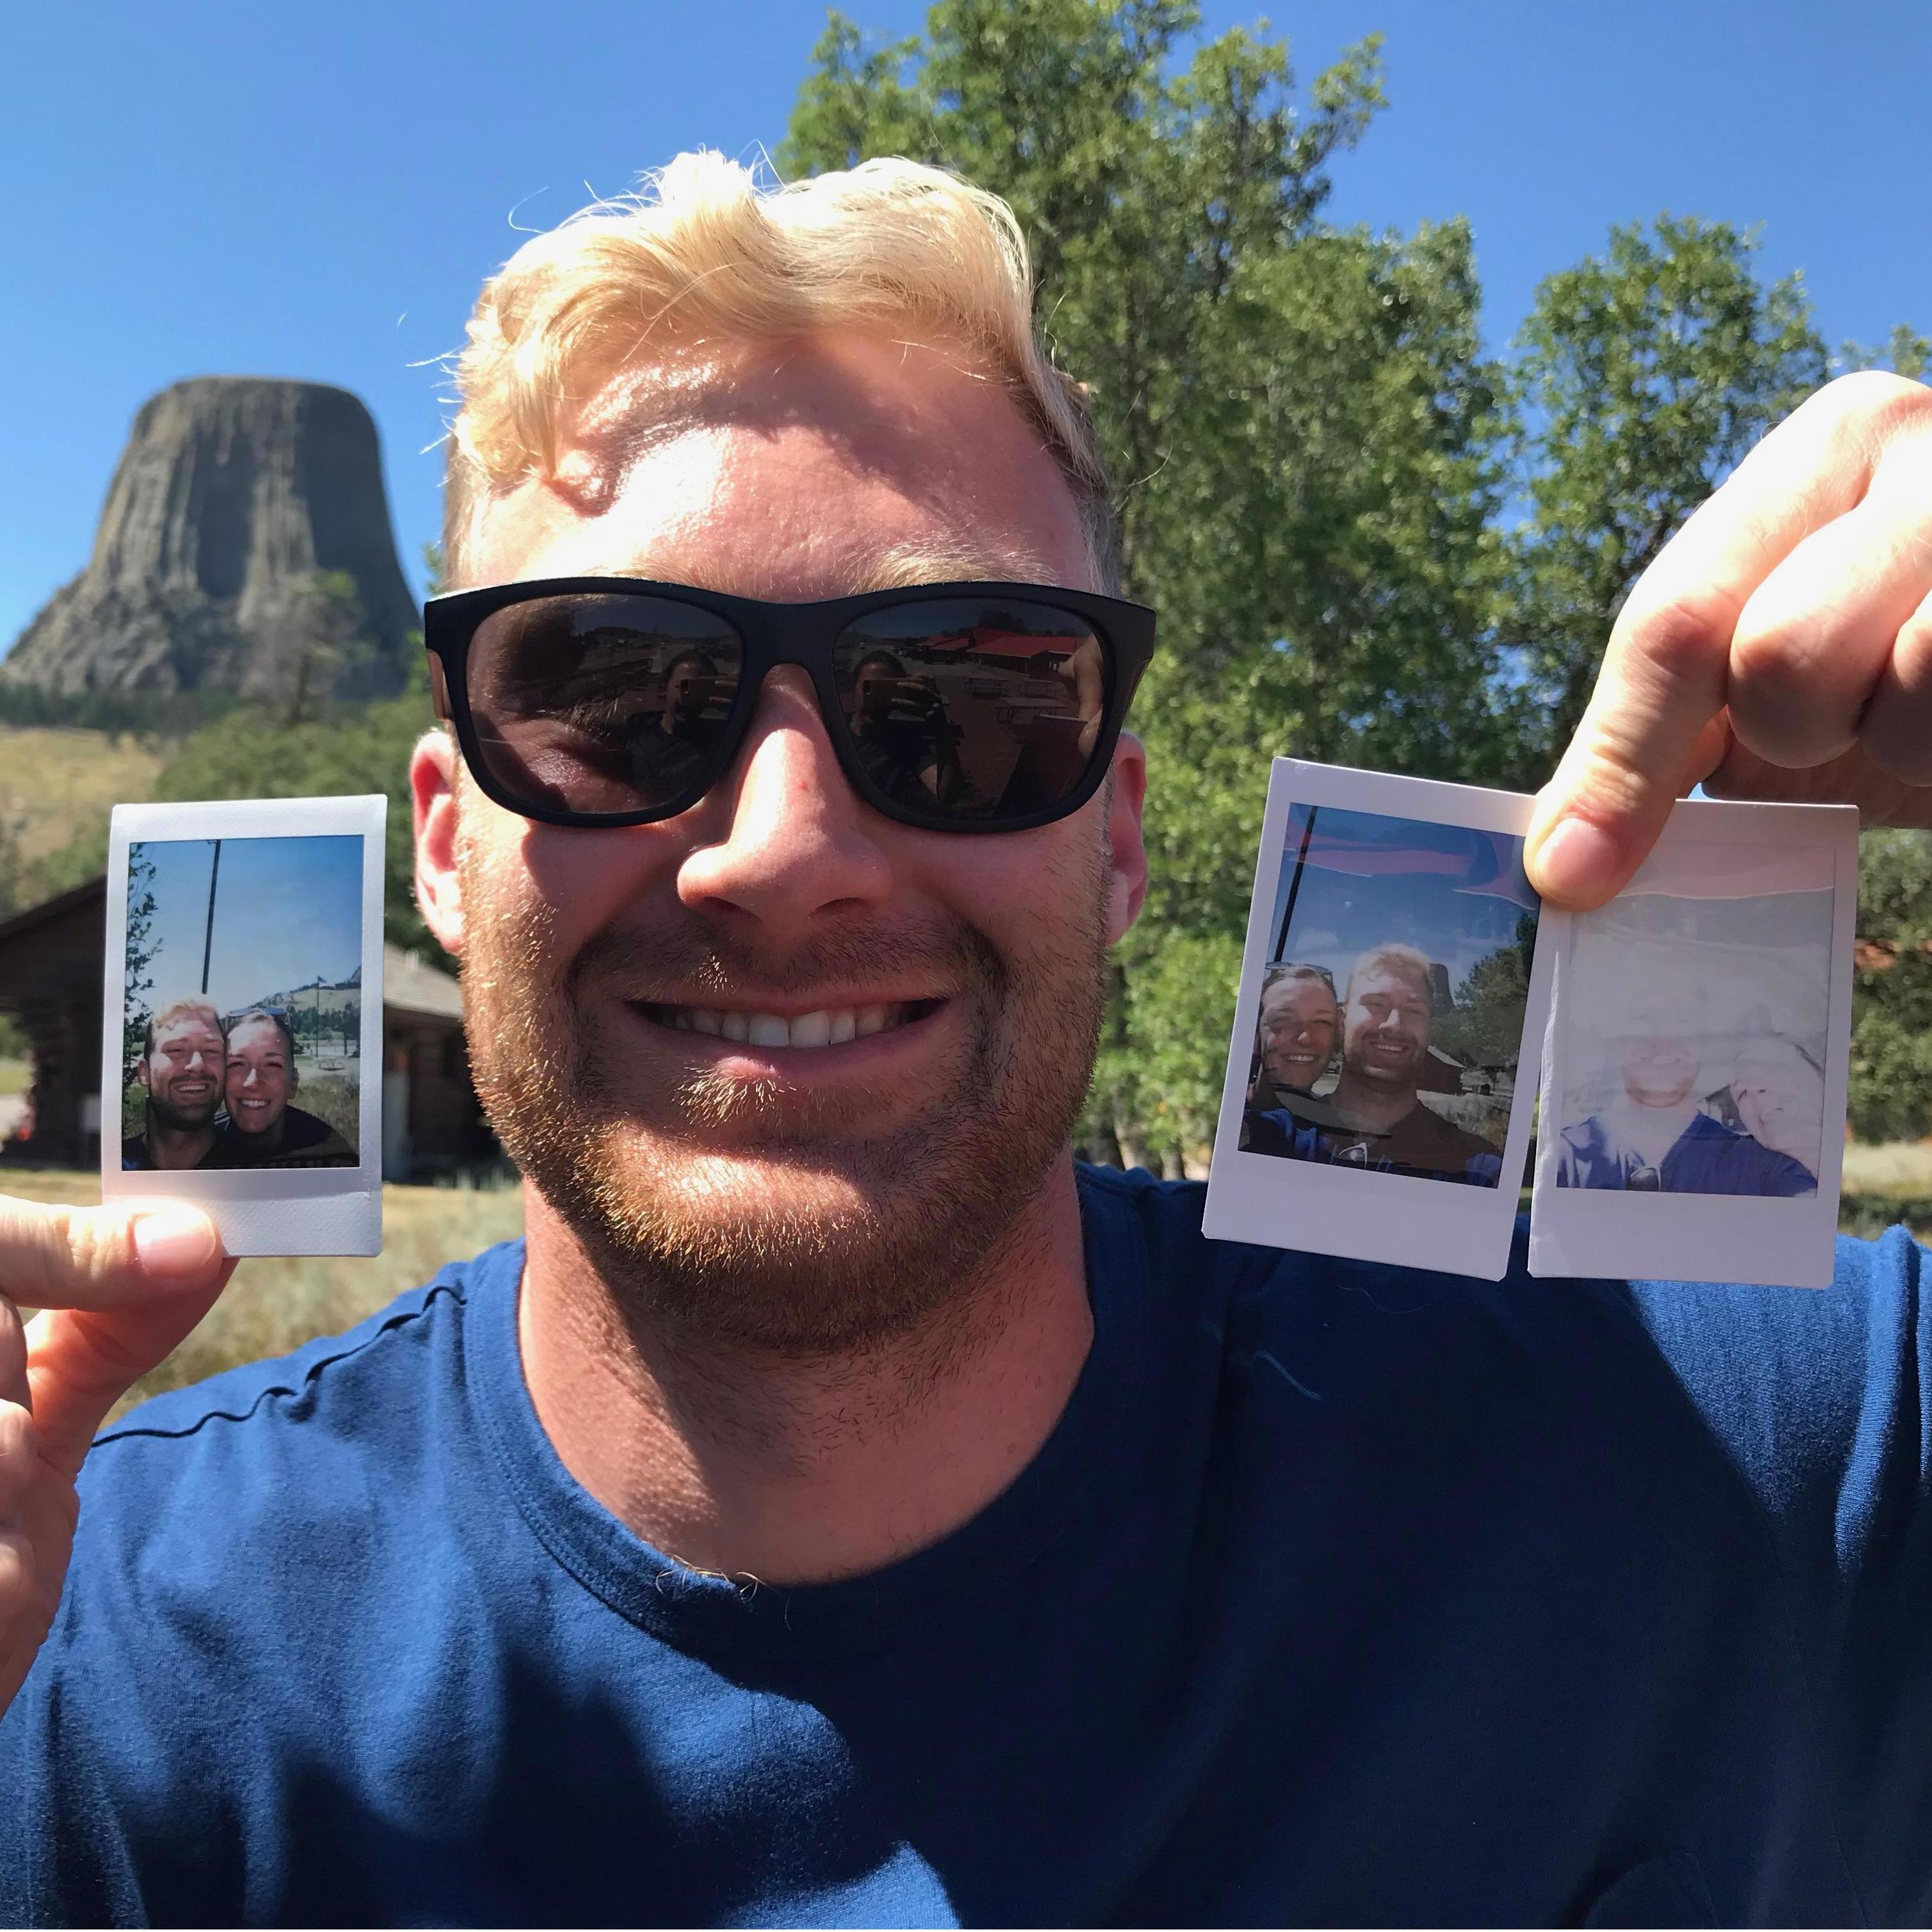 You see here, Ben tries really hard to capture Devil's tower in a polaroid photo. His attempts were unsuccessful.